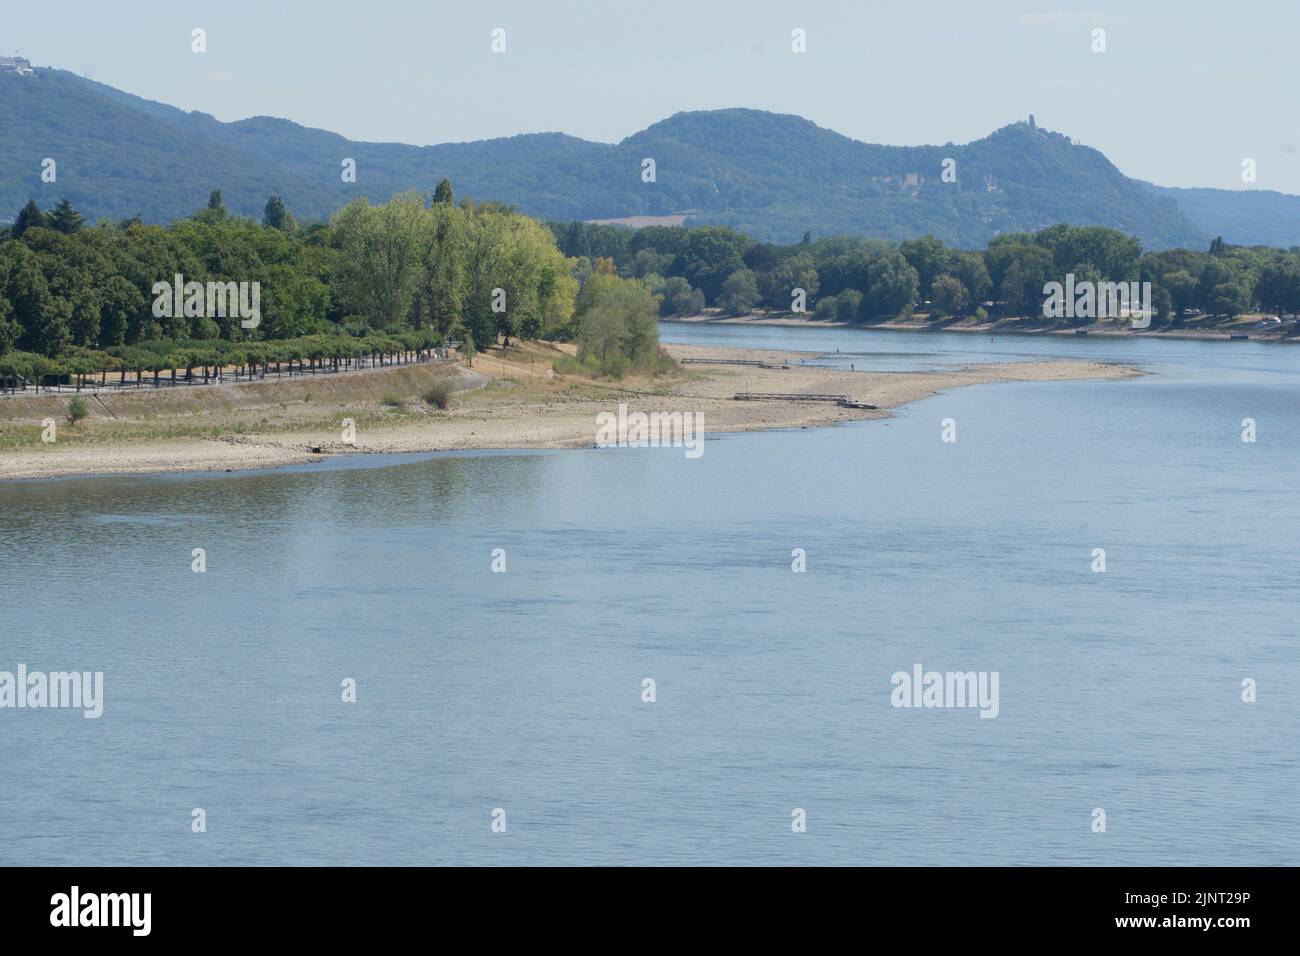 Bonn, Germany, 13 August 2022: The Rhine at Bonn is much lower than usual, exposing sandbars and stranding ferries normally used by commuters. The drought in Western Europe particularly threatens German freight, more of which travels by river than in other countries. Barges are having to travel with lighter loads to be able to navigate the shallow waters. Anna Watson/Alamy Live News Stock Photo